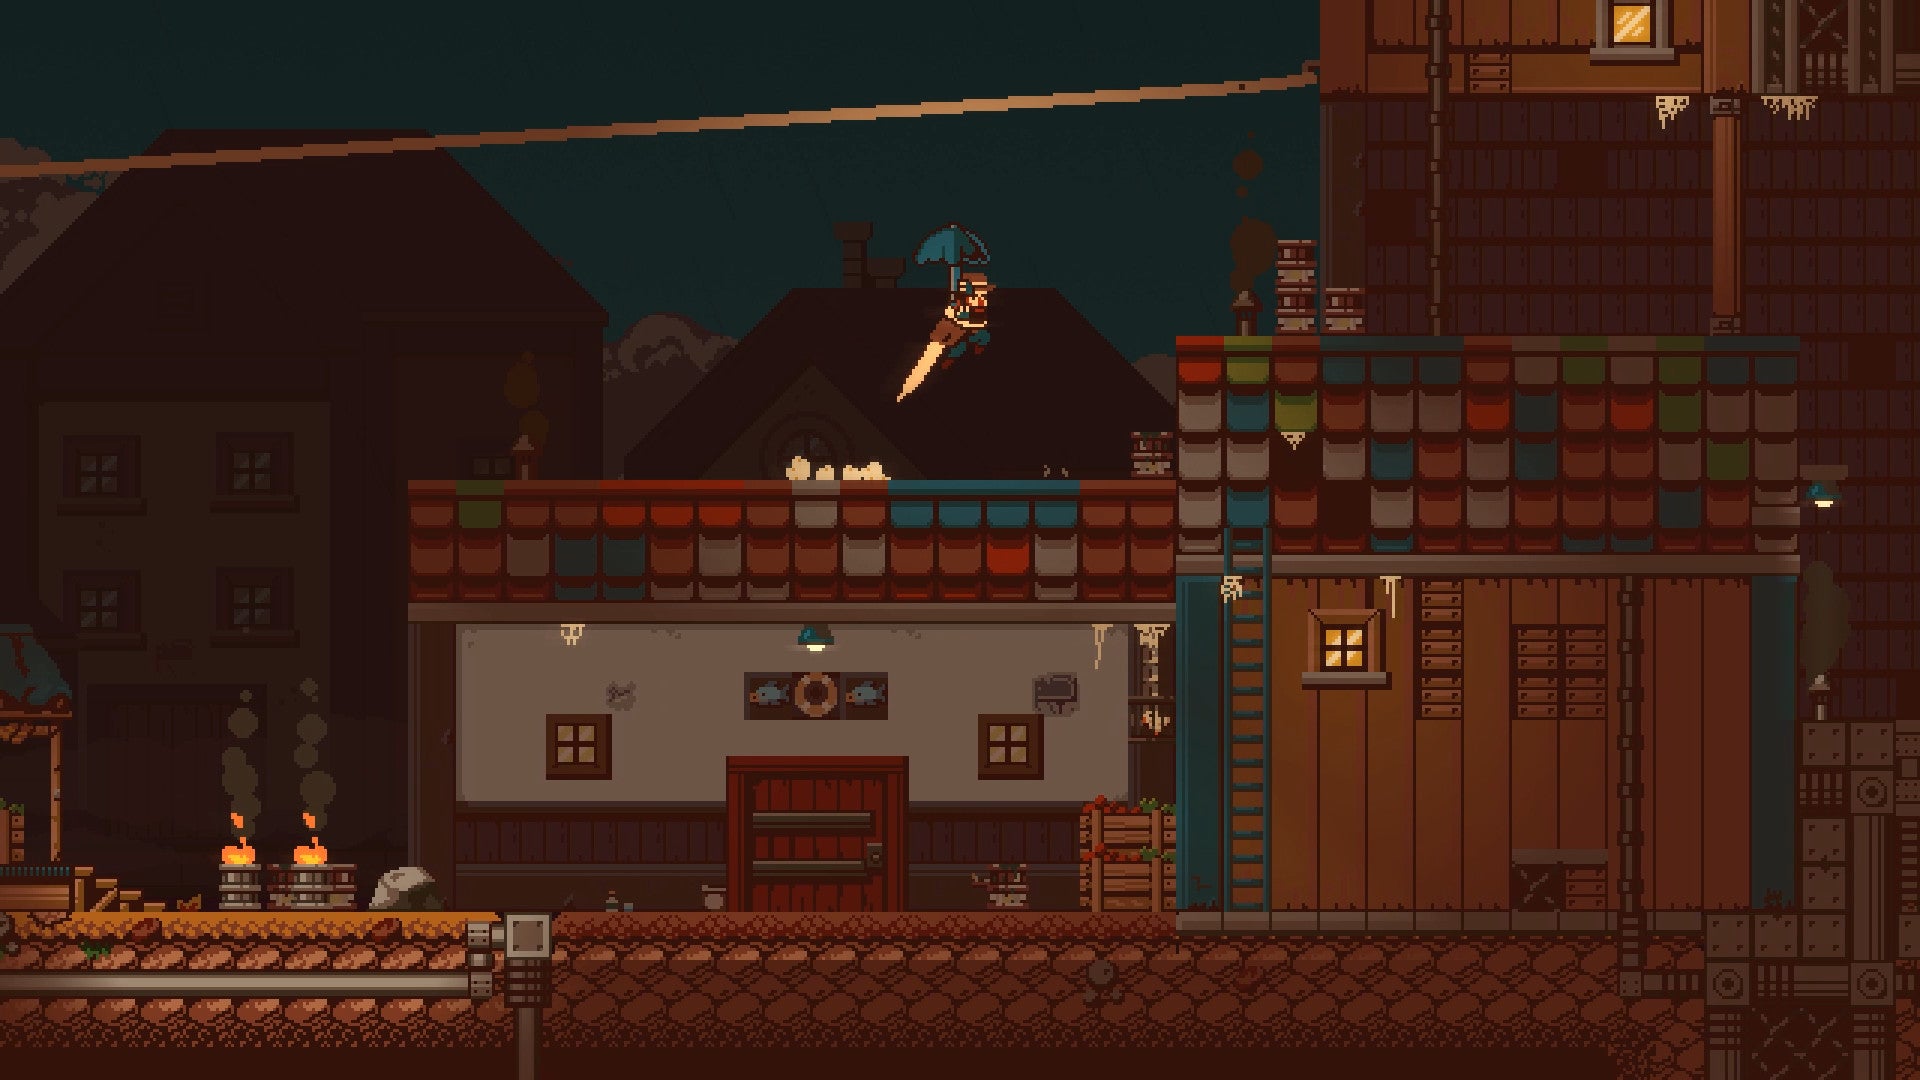 A 2D pixel art screenshot of Gunbrella showing a man leaping over rooftops holding an umbrella over his head. There's a zipline above him.